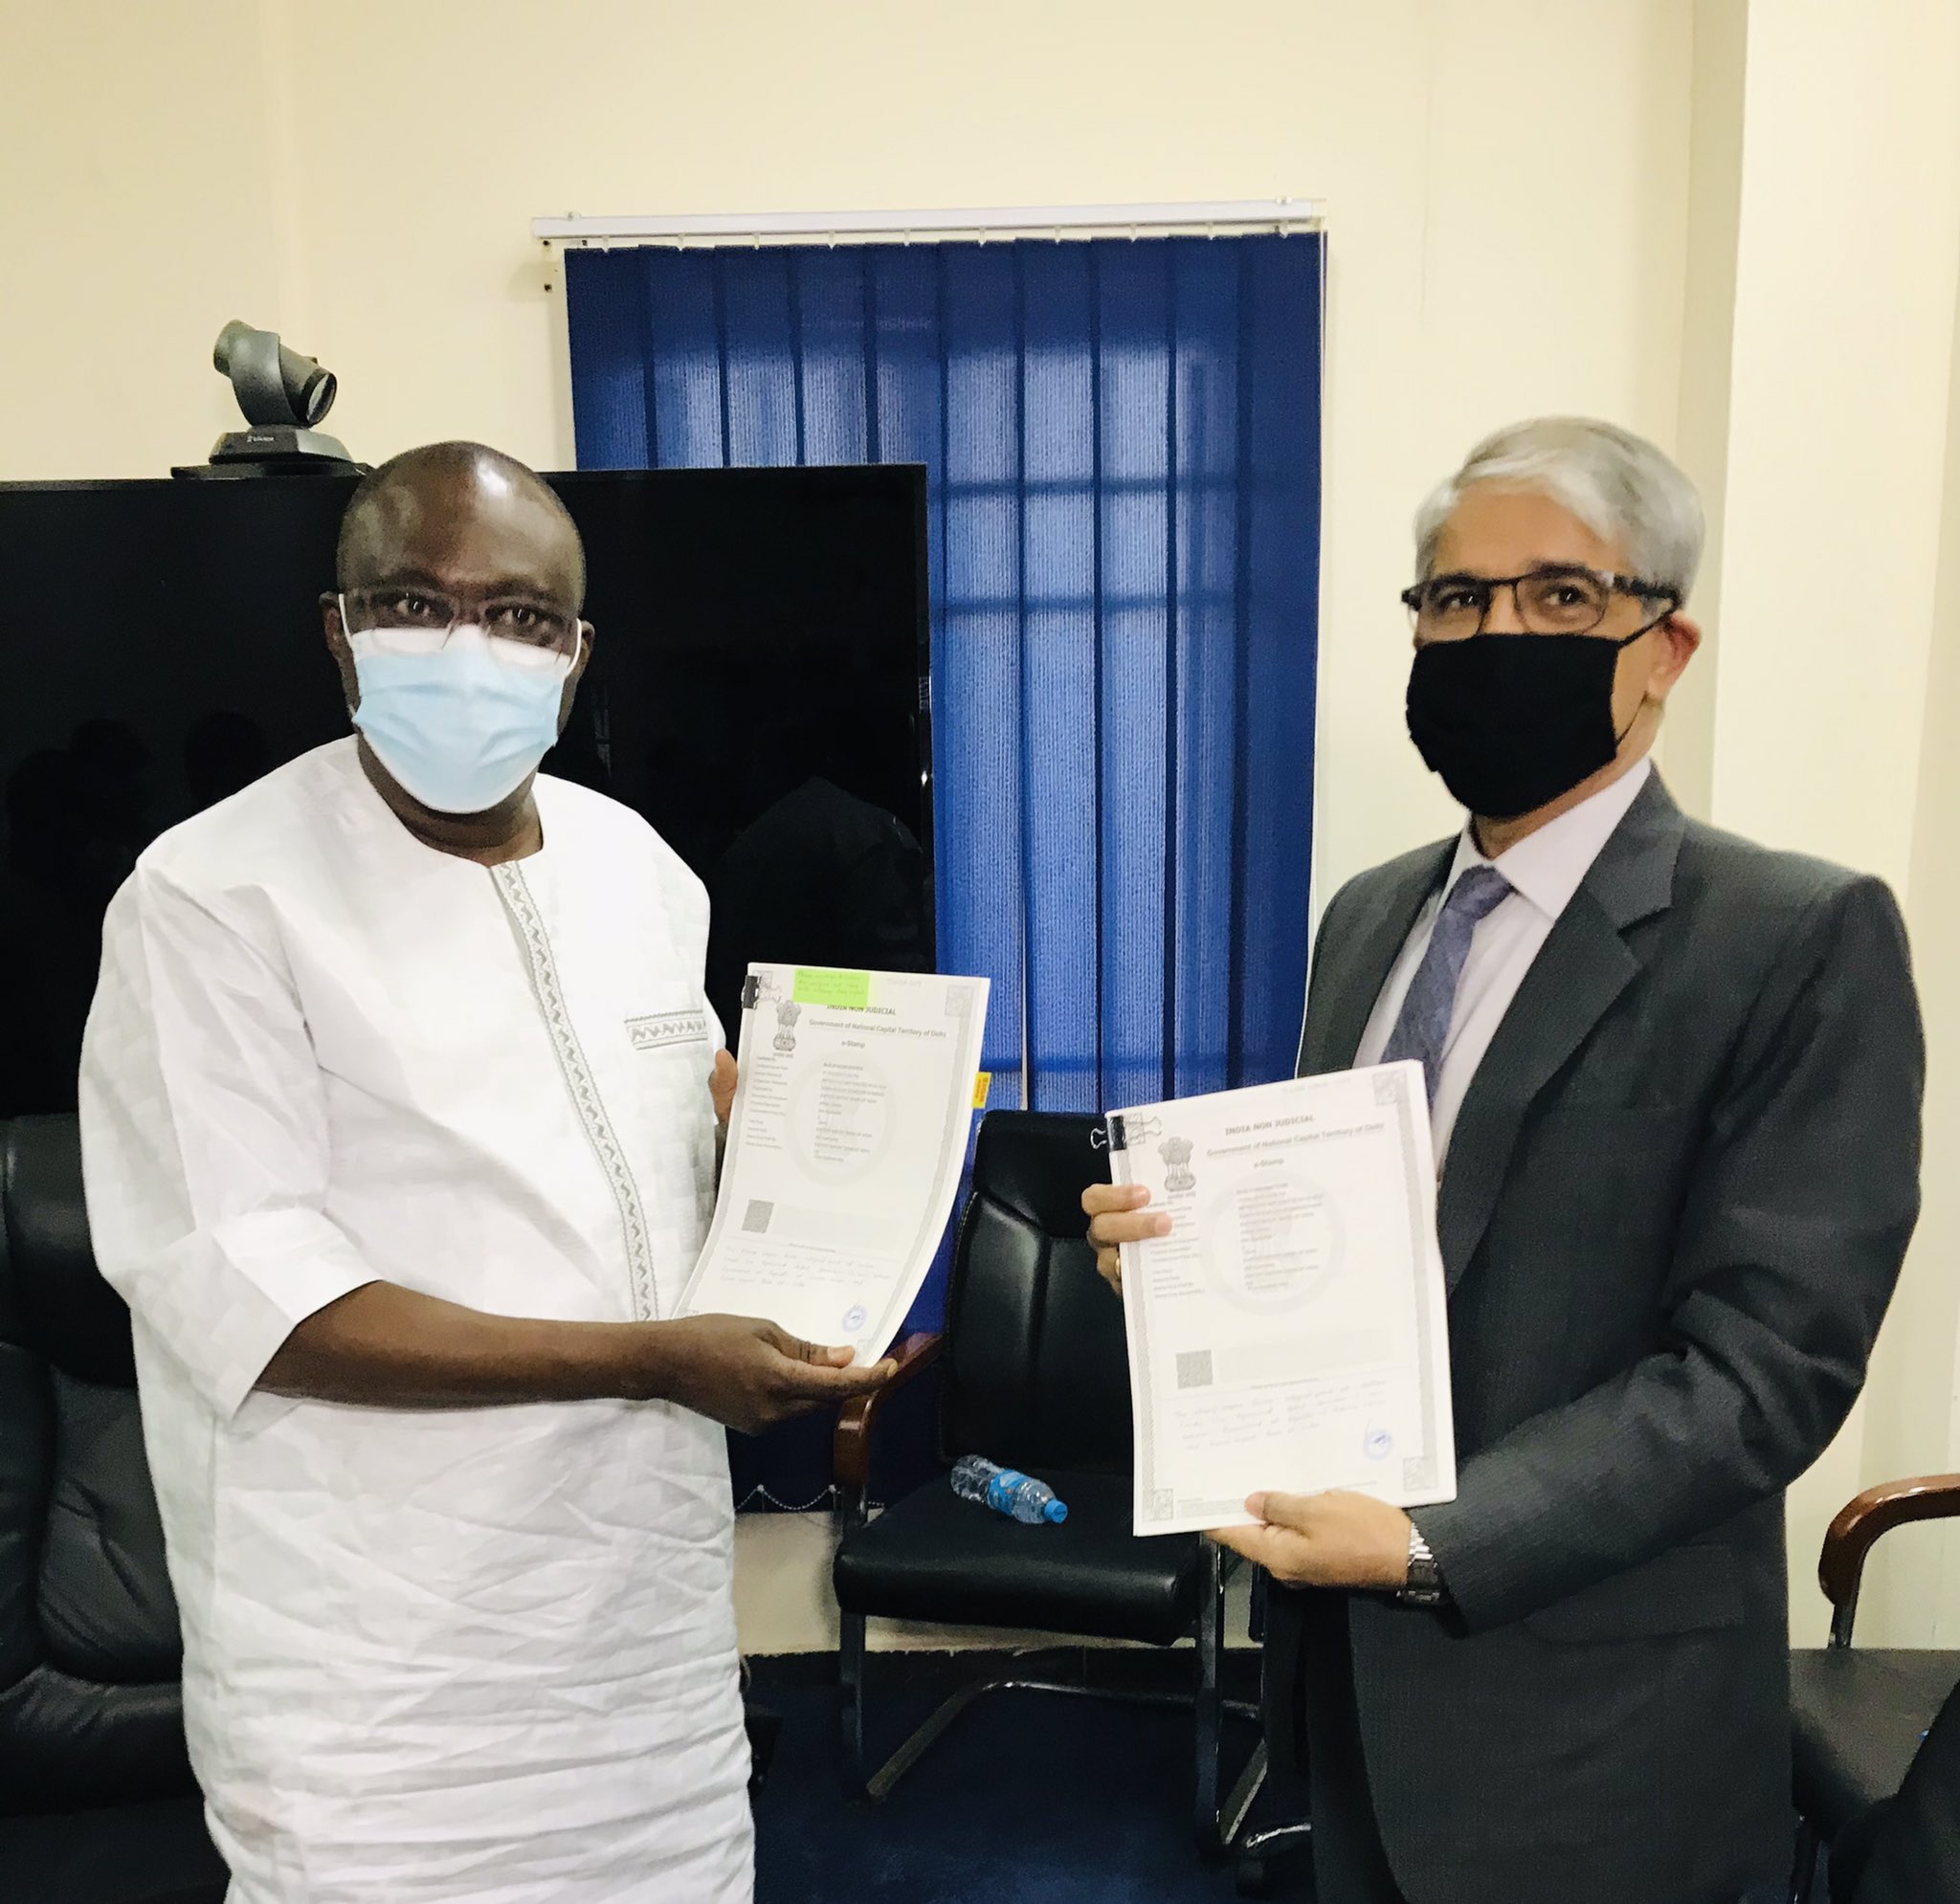 High Commissioner Rakesh Arora exchanged Agreement with Sierra Leone Ministers of Finance & Water Resources on 5 Feb 2021 for loan/Line of Credit of $15 million by India for expansion of potable water facilities in Sierra Leone